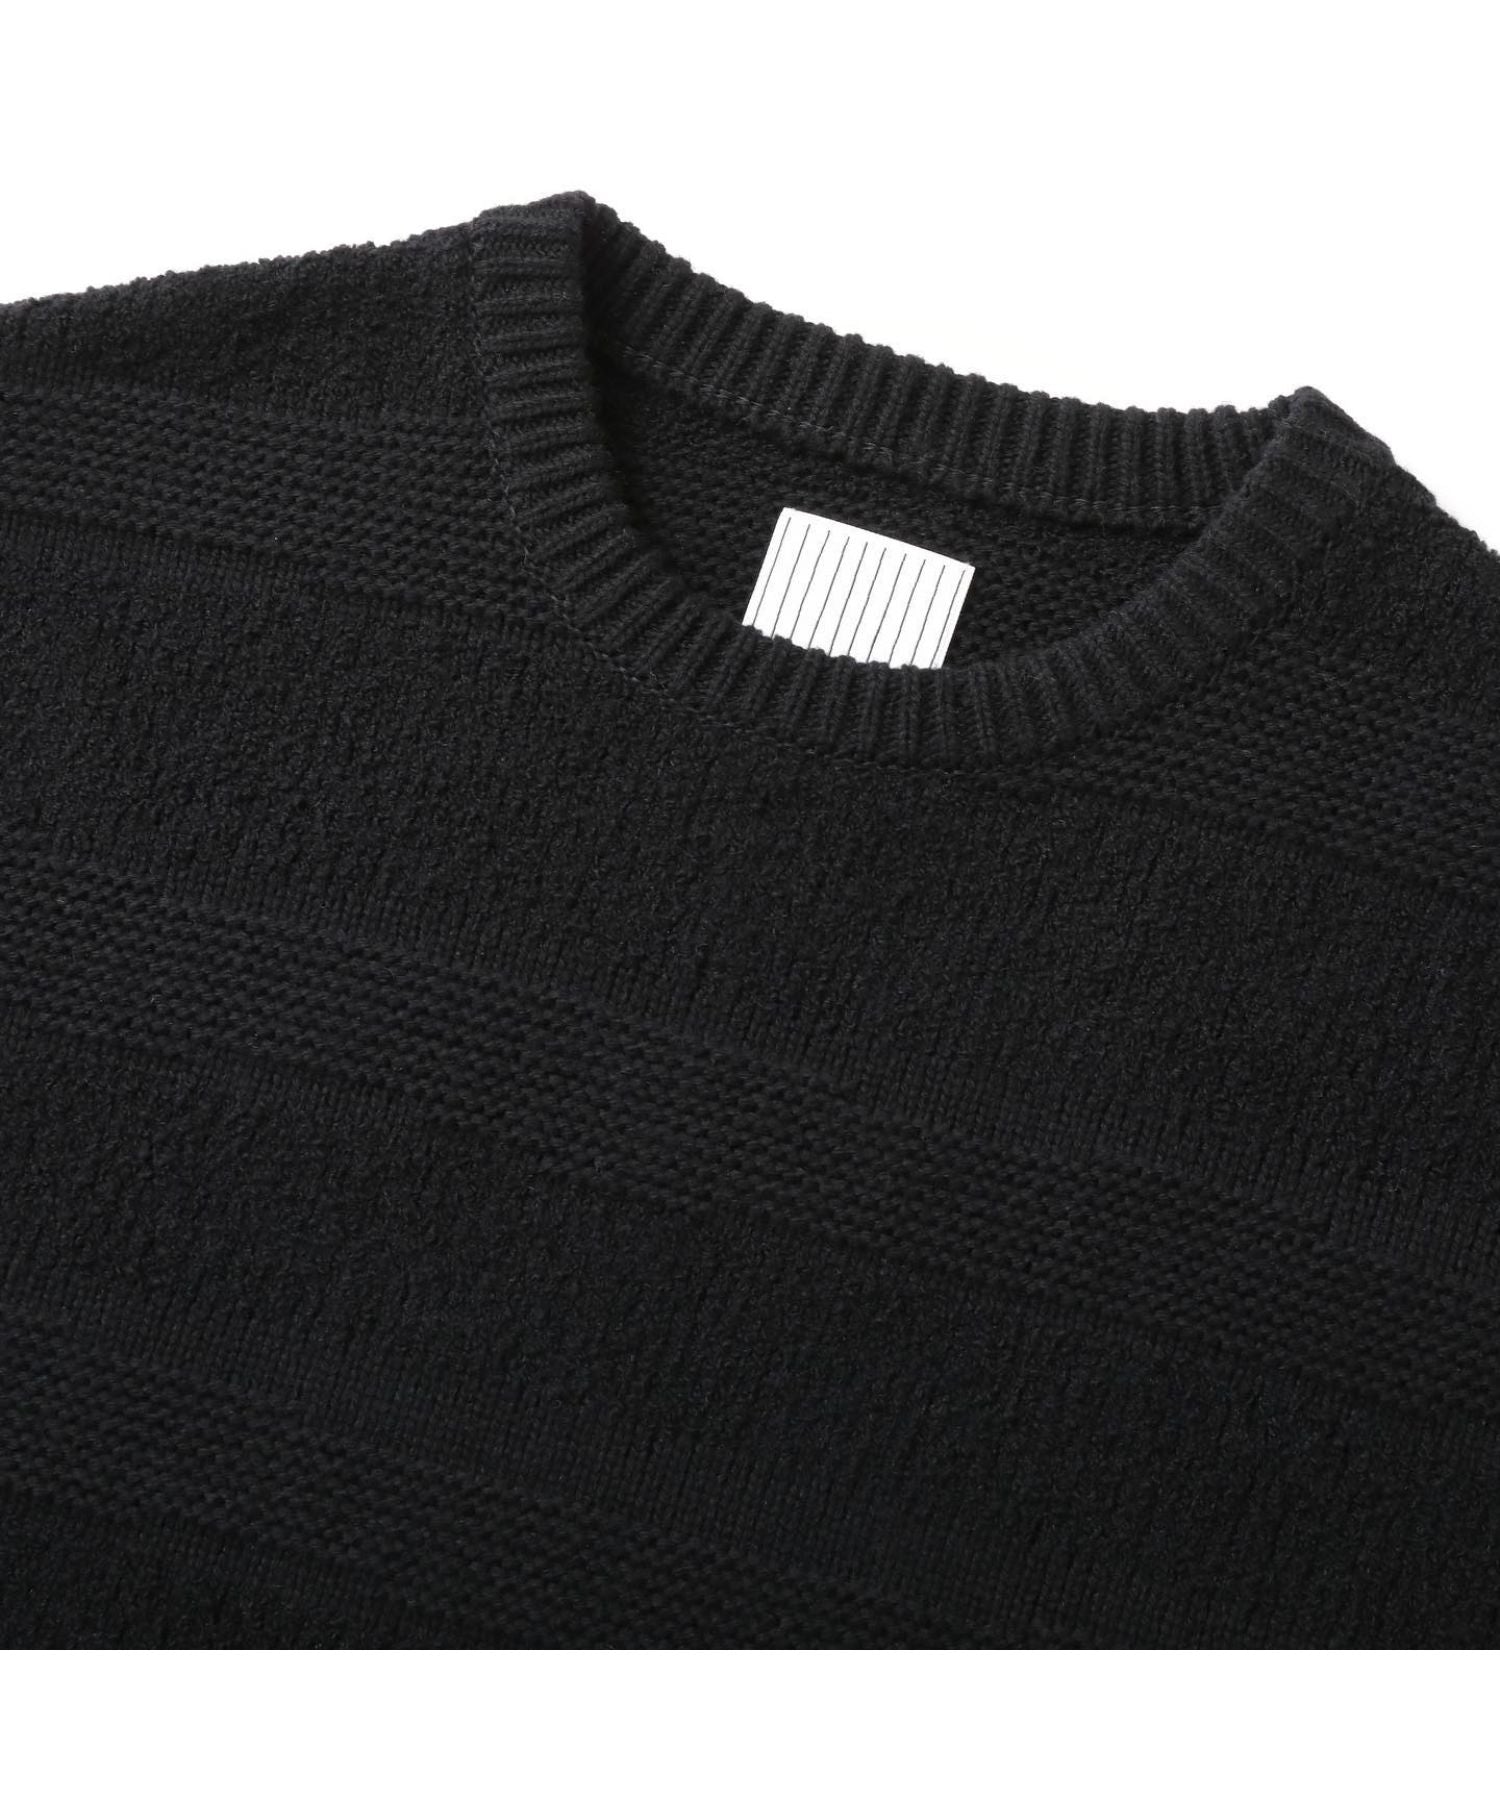 SFC Side Stripes Knit - S.F.C (Stripes For Creative) (エスエフシー 